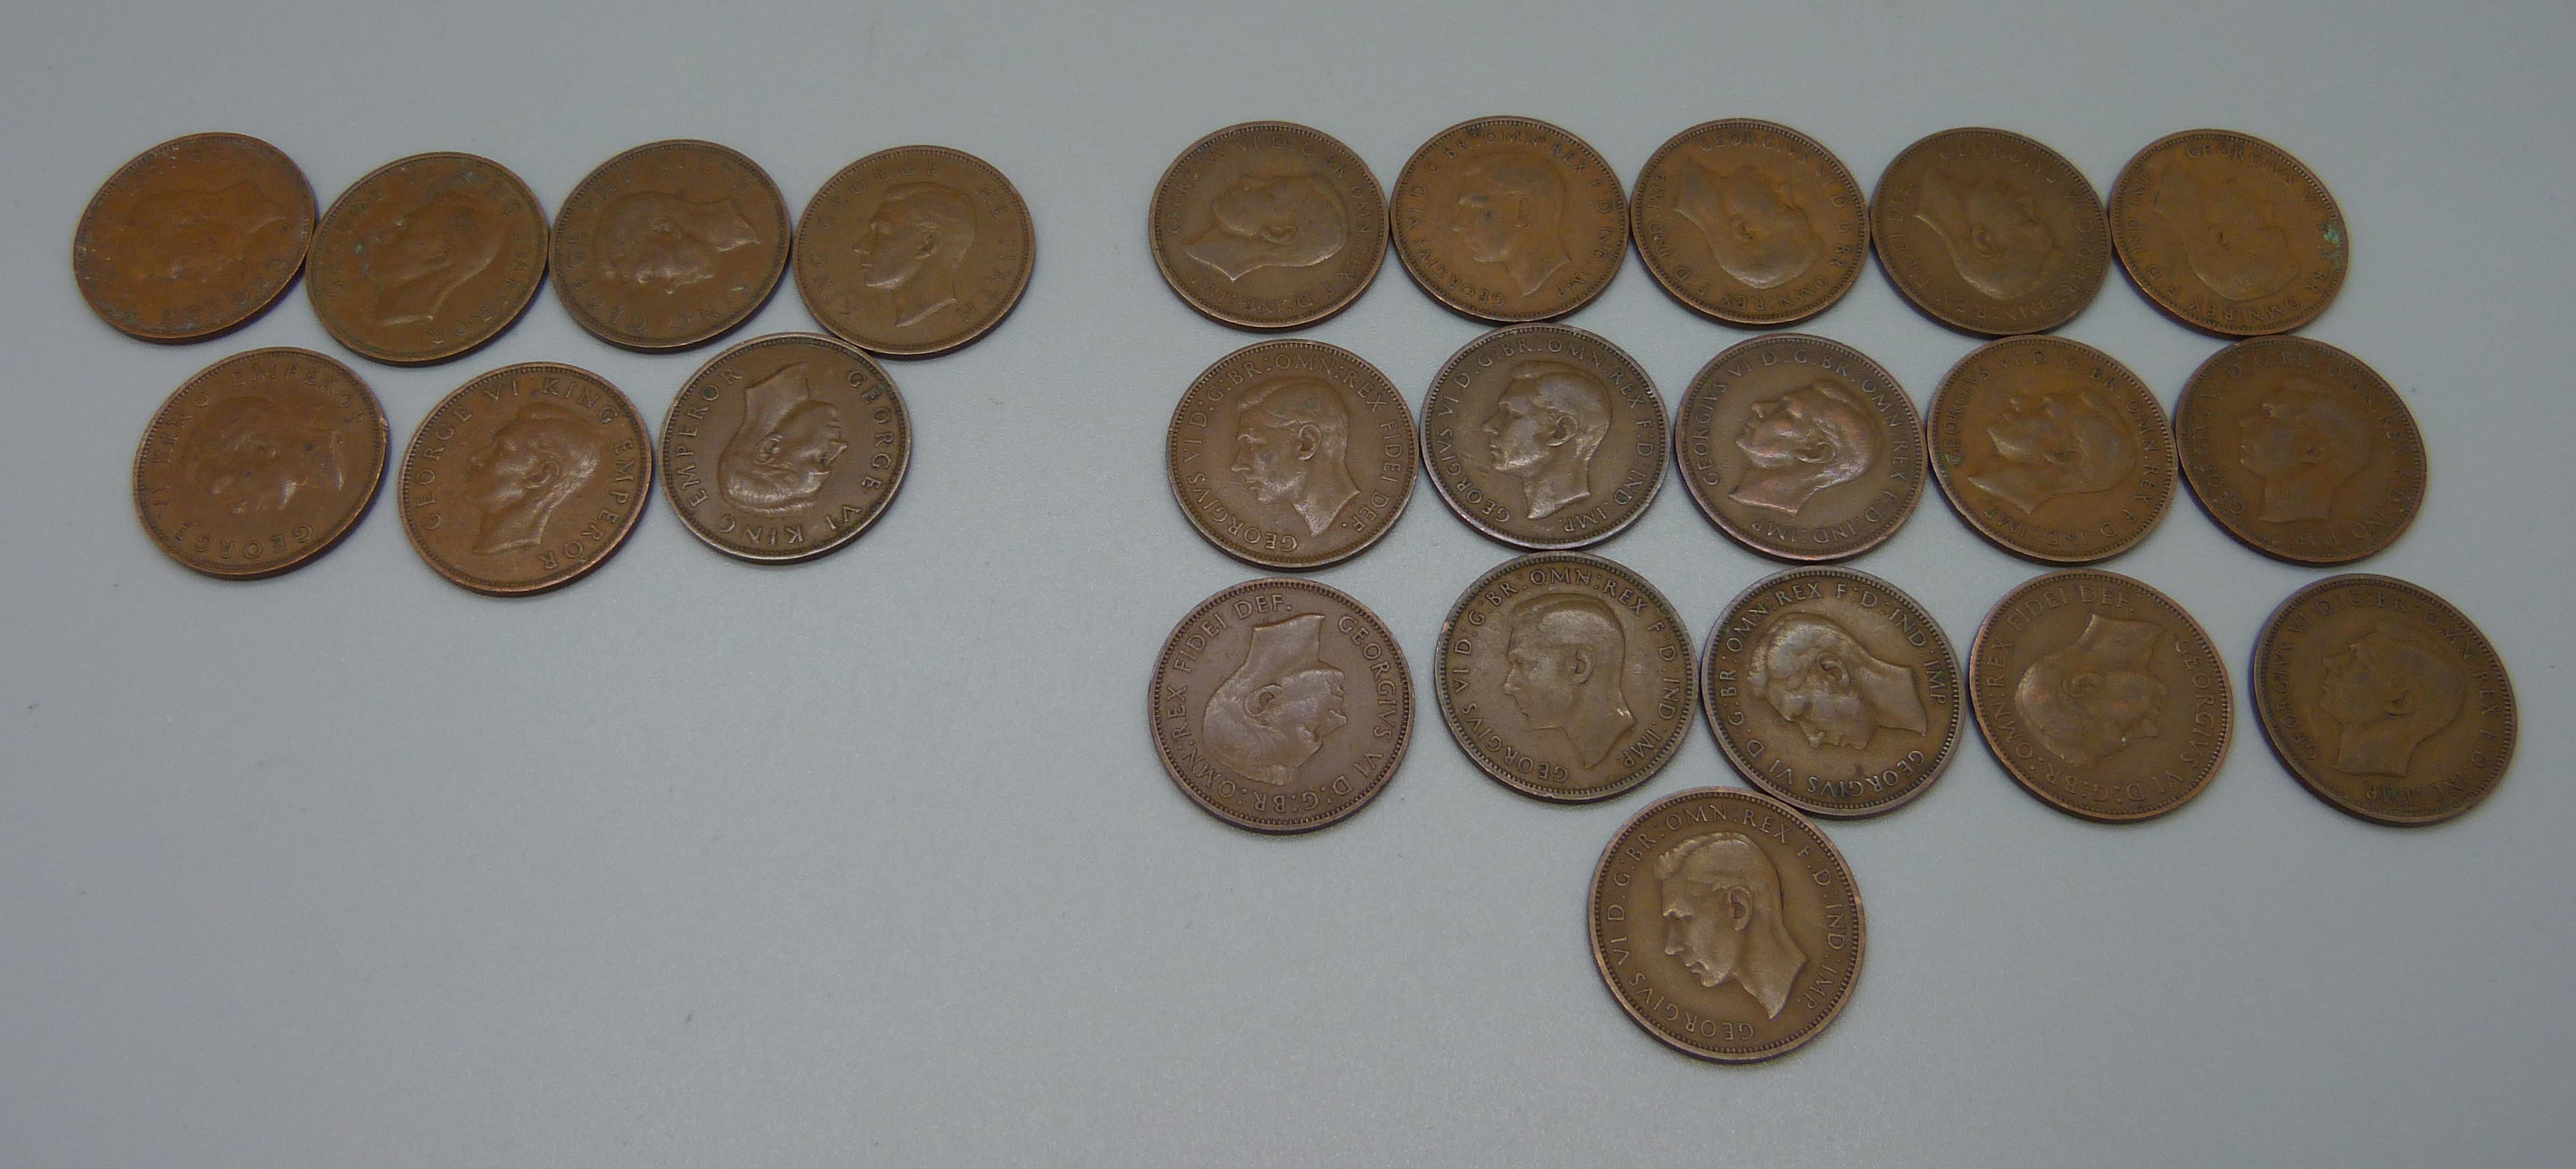 A collection of George VI New Zealand half pennies, 2x 1941, '44, '45, '46, '51 and '52, and King